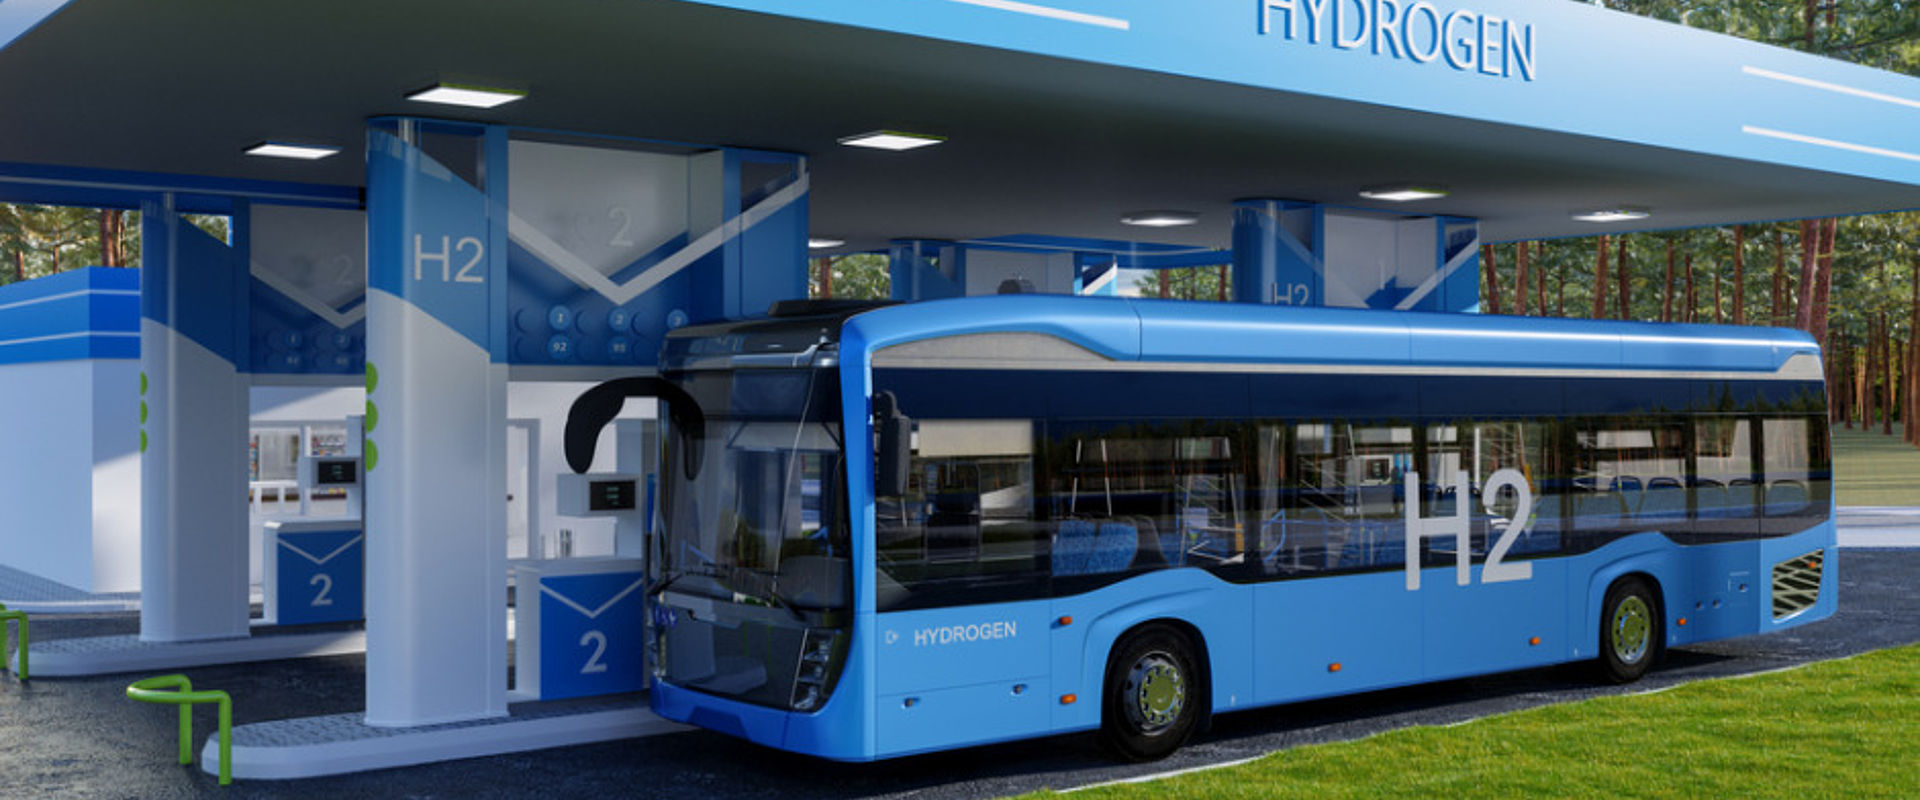 Hydrogen powered bus refuelling at station